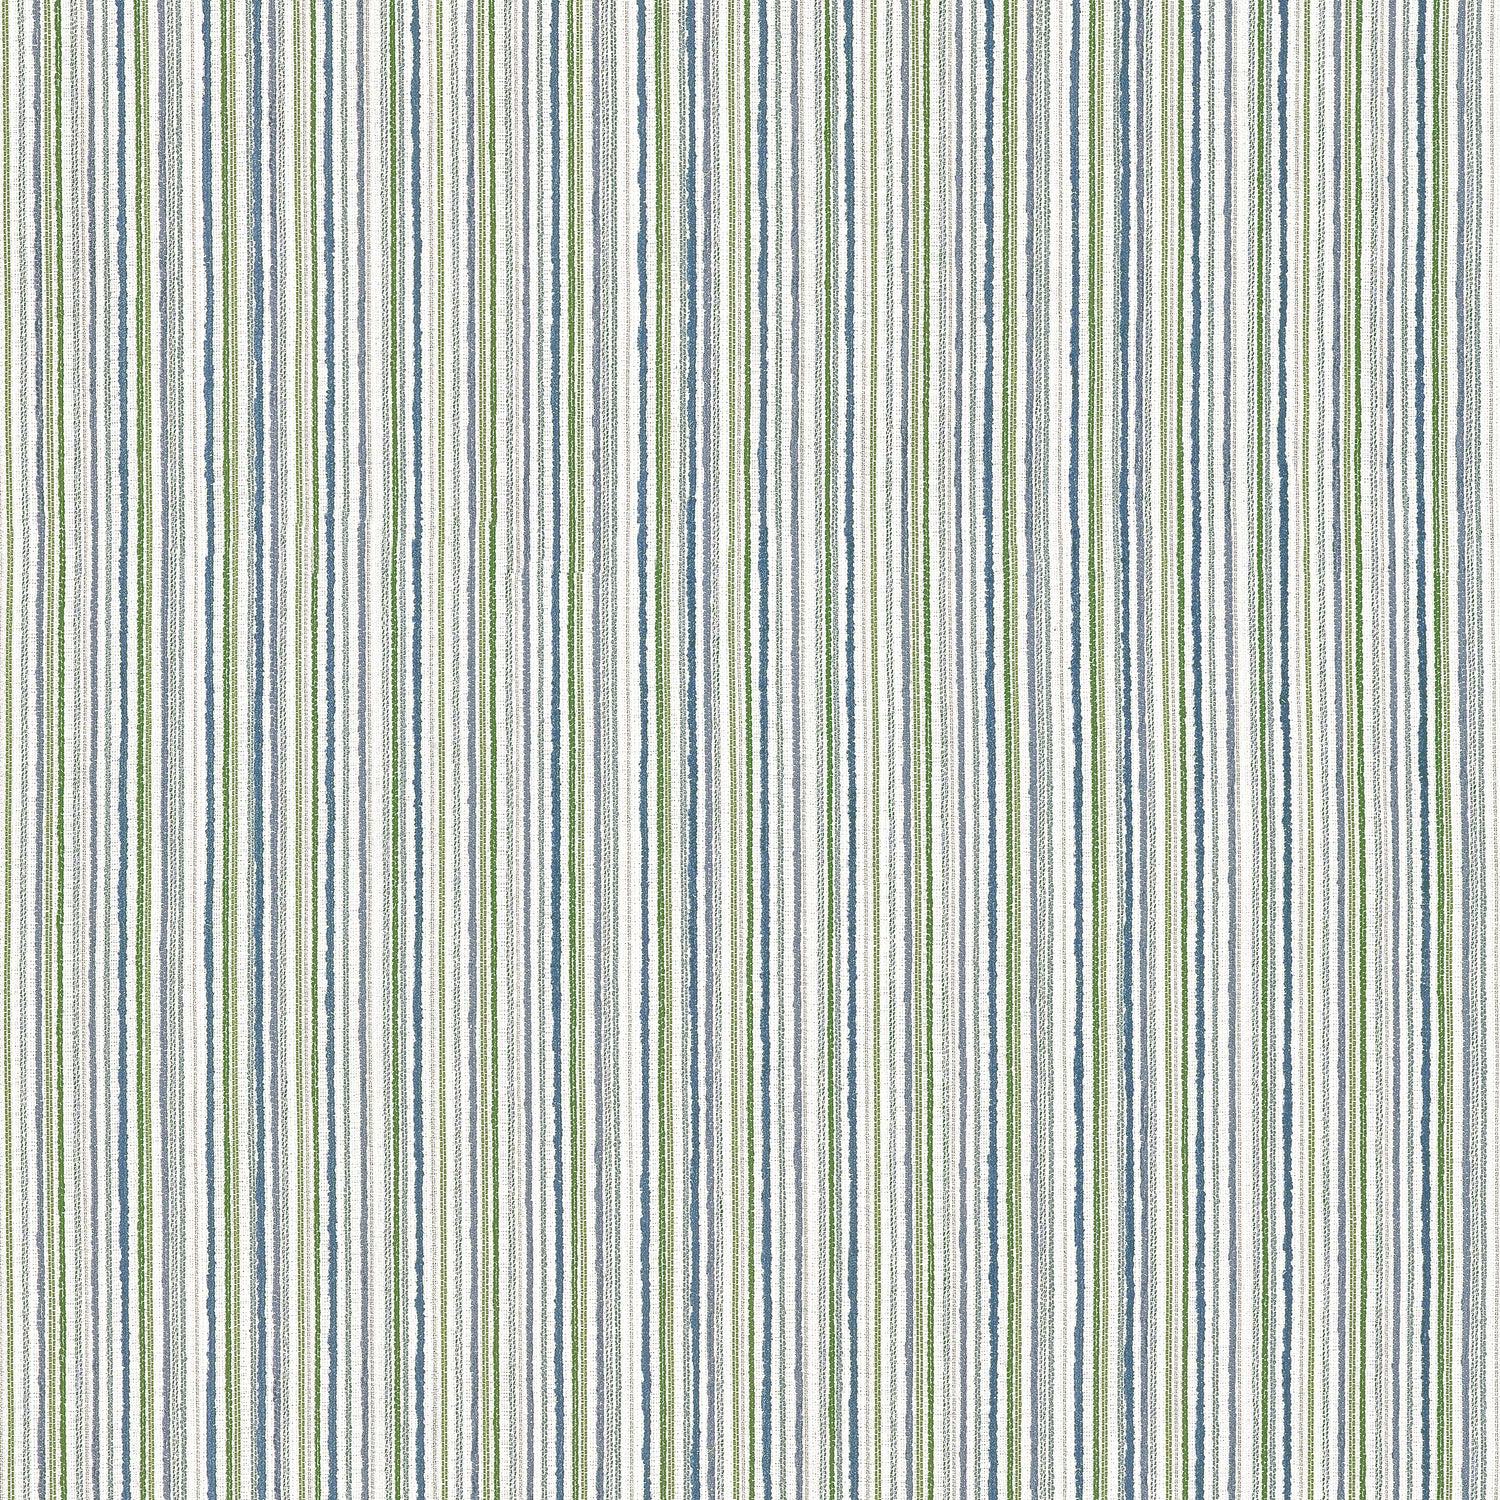 Ernie Stripe fabric in whirlpool color - pattern number W81945 - by Thibaut in the Companions collection